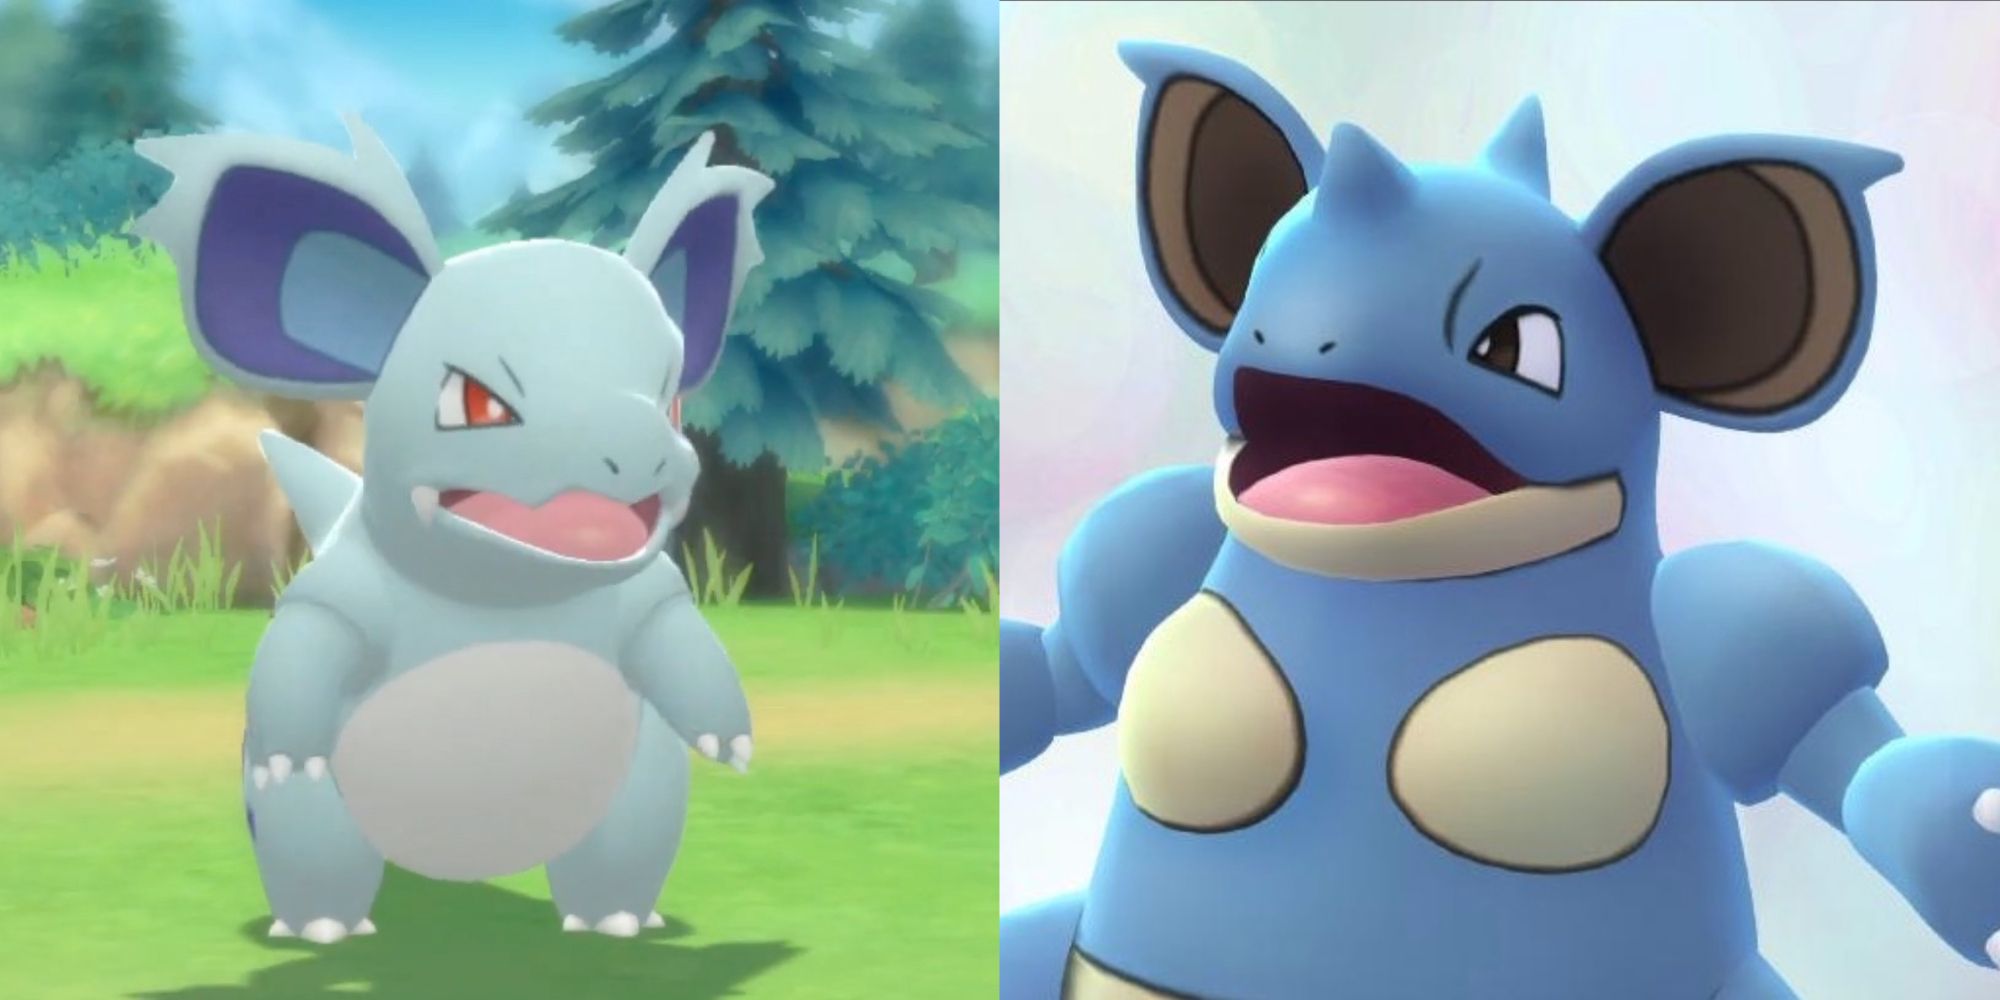 Nidorina and Nidoqueen facing each other with their mouths open